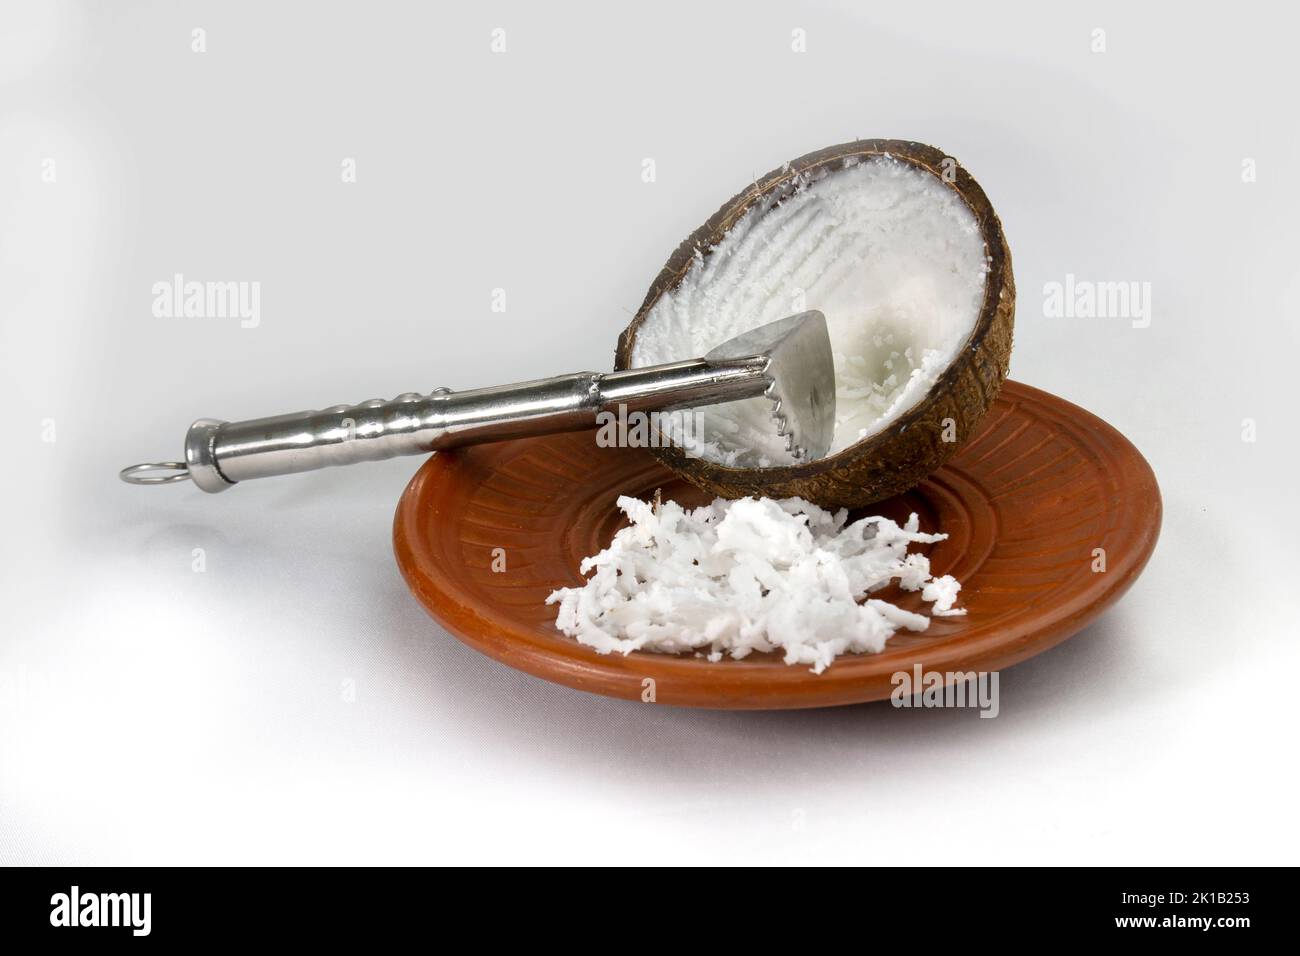 https://c8.alamy.com/comp/2K1B253/grated-coconut-in-a-mud-plate-with-a-coconut-hand-grater-on-white-background-2K1B253.jpg